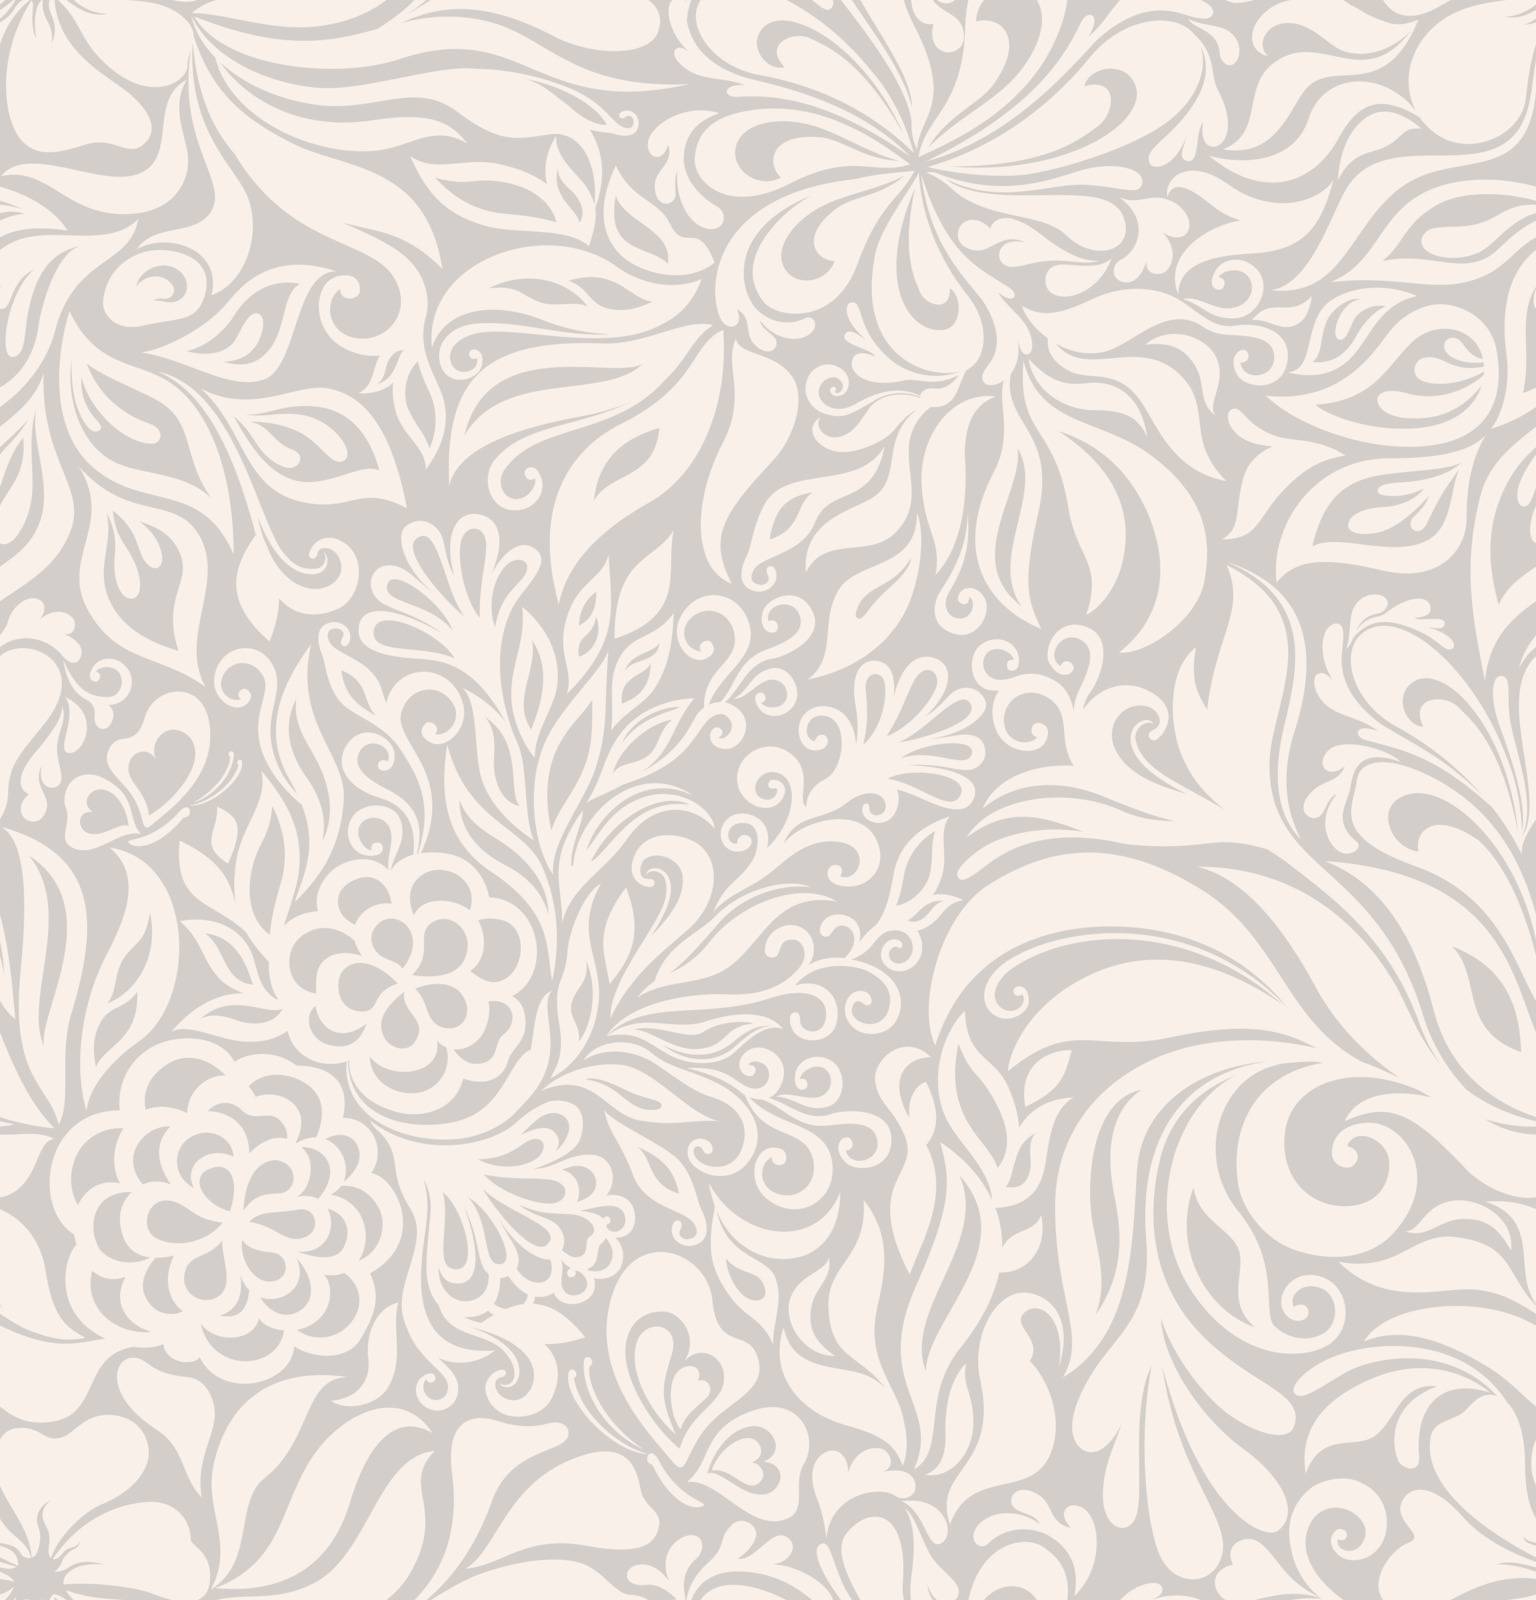 Luxury seamless graphic background with flowers and leaves